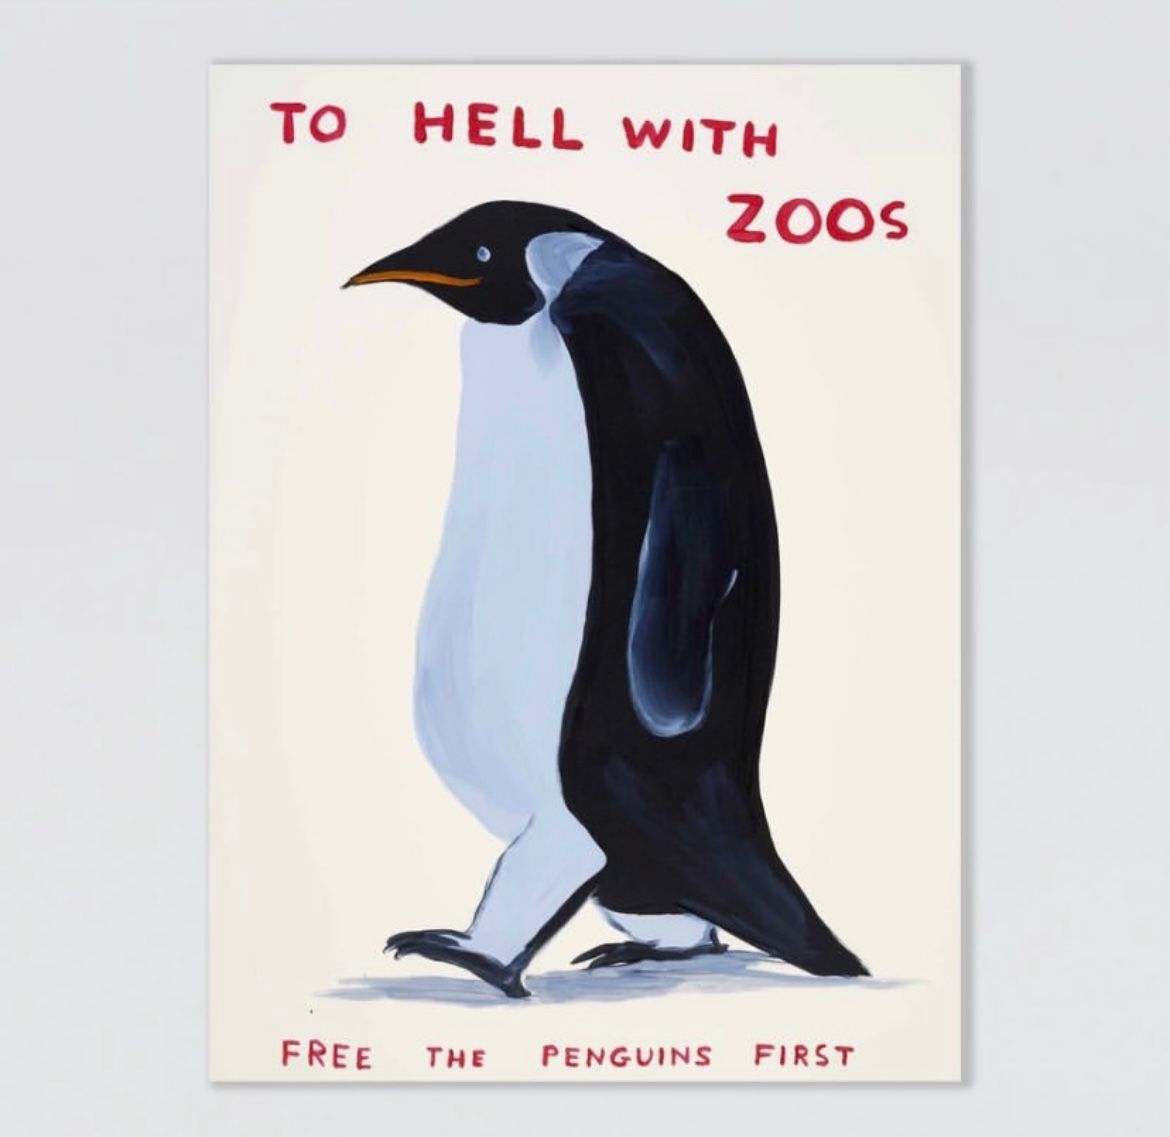 David Shrigley-To Hell with Zoos, 2021